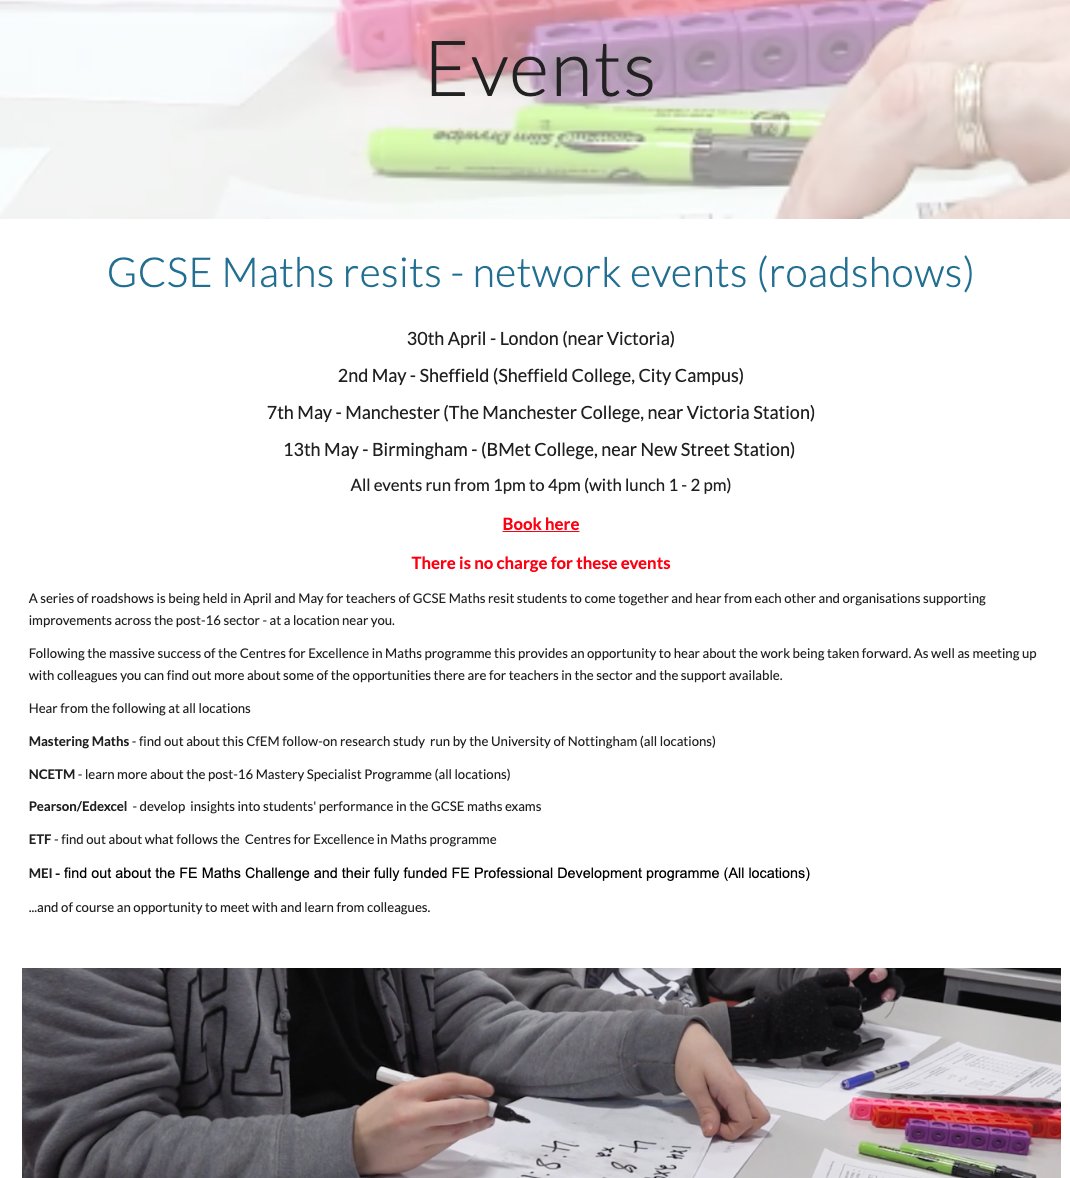 Calling all London and colleges in the South/South East.... Do you teach GCSE resit students? Are you in danger of missing out? This free network event is for you ..... Link masteringmaths.org/events